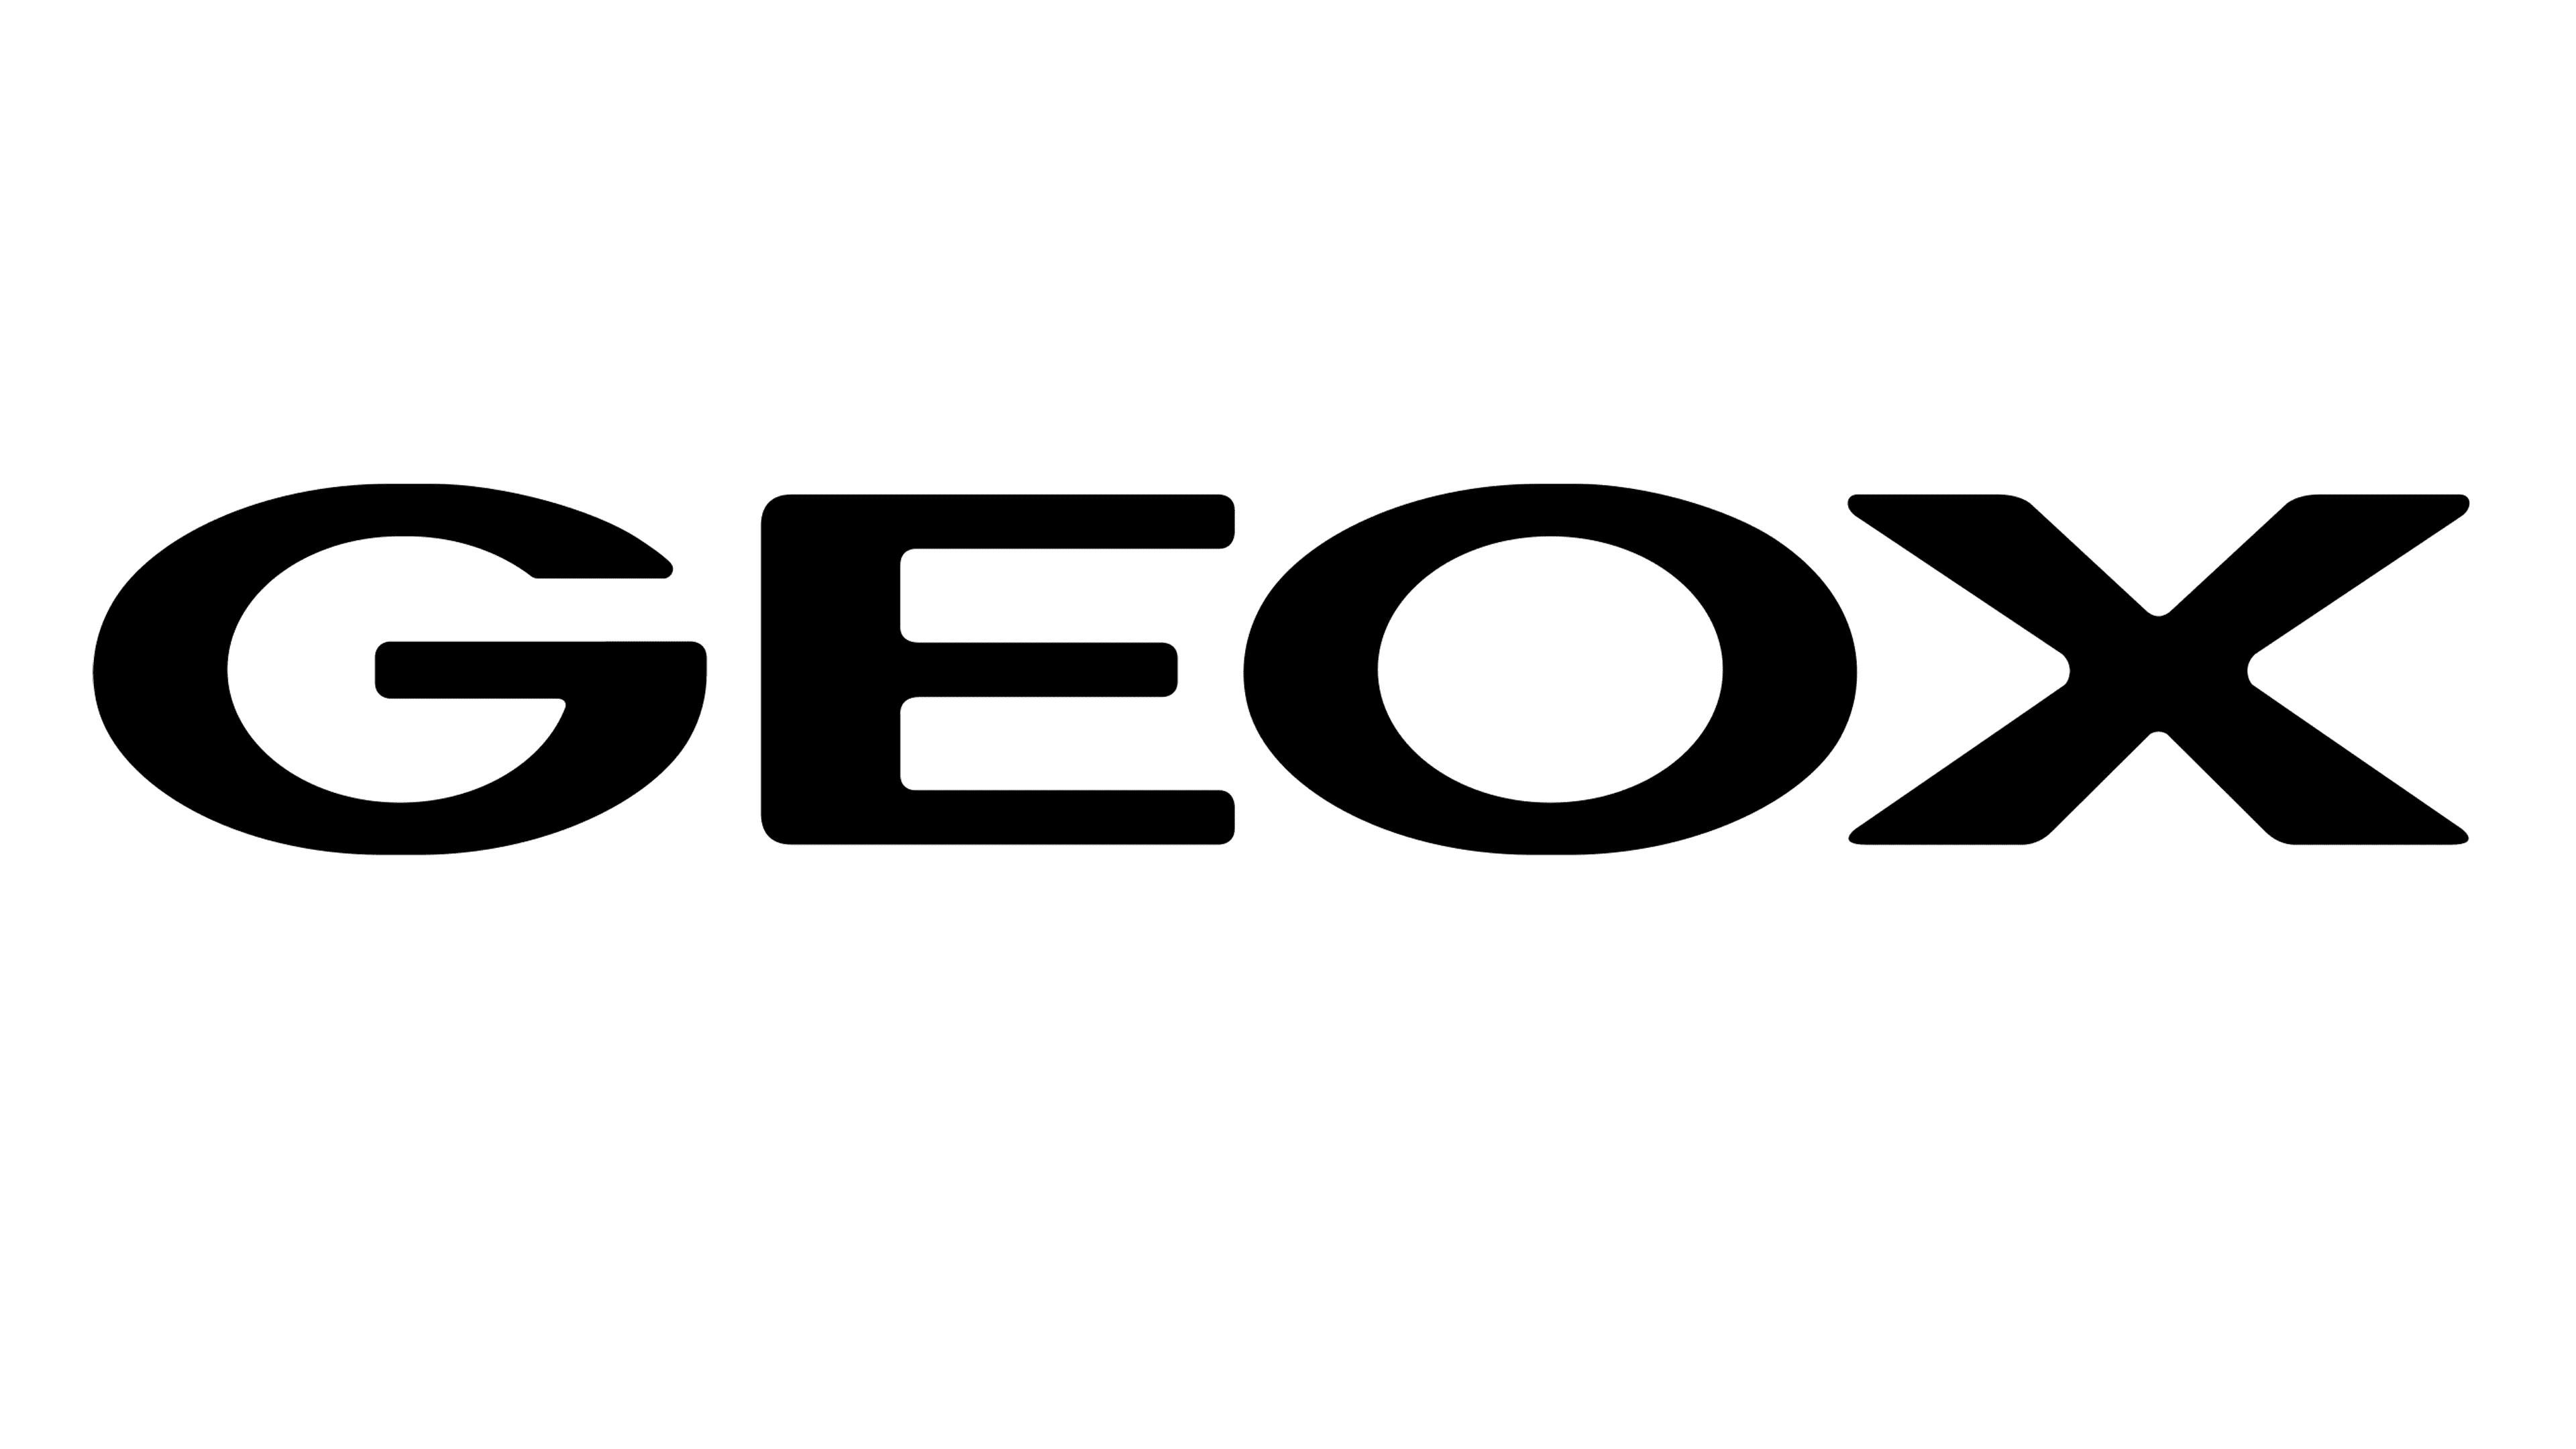 Geox and symbol, PNG, brand